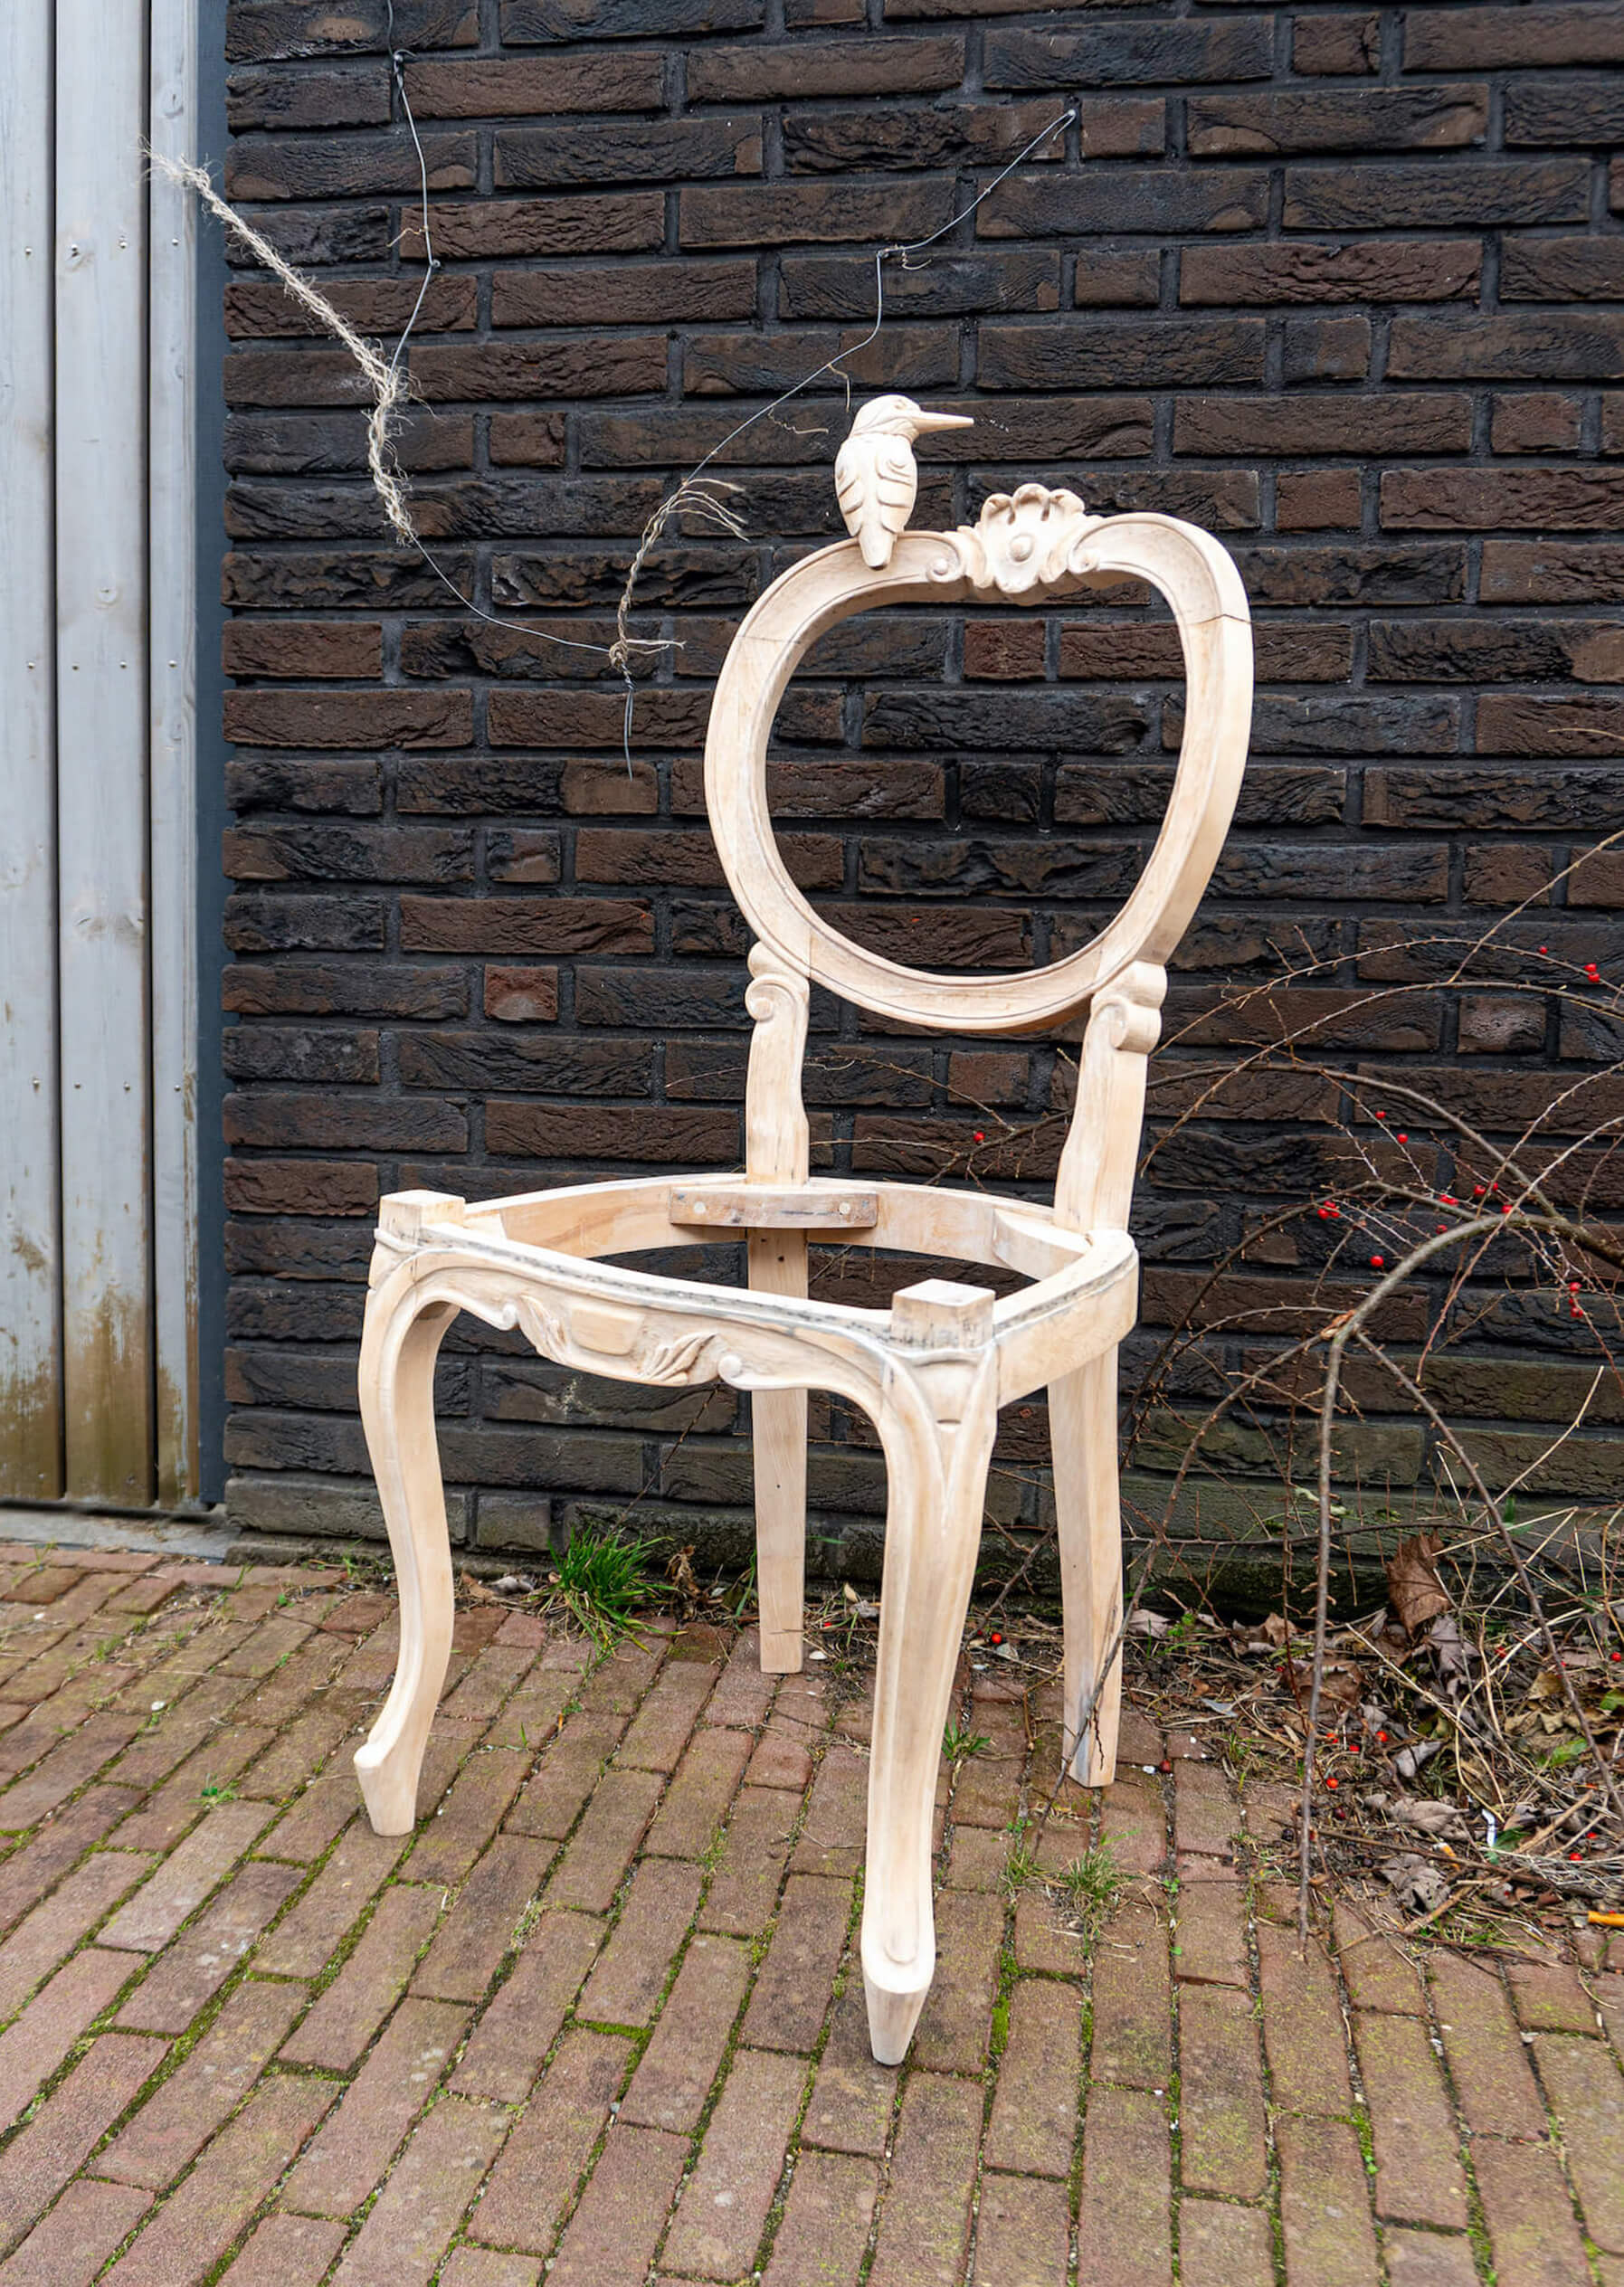 Bird and Chair wood sculpture by Teresa Hunyadi. Bird is inspired by a kingfisher. The photo was taken outside.